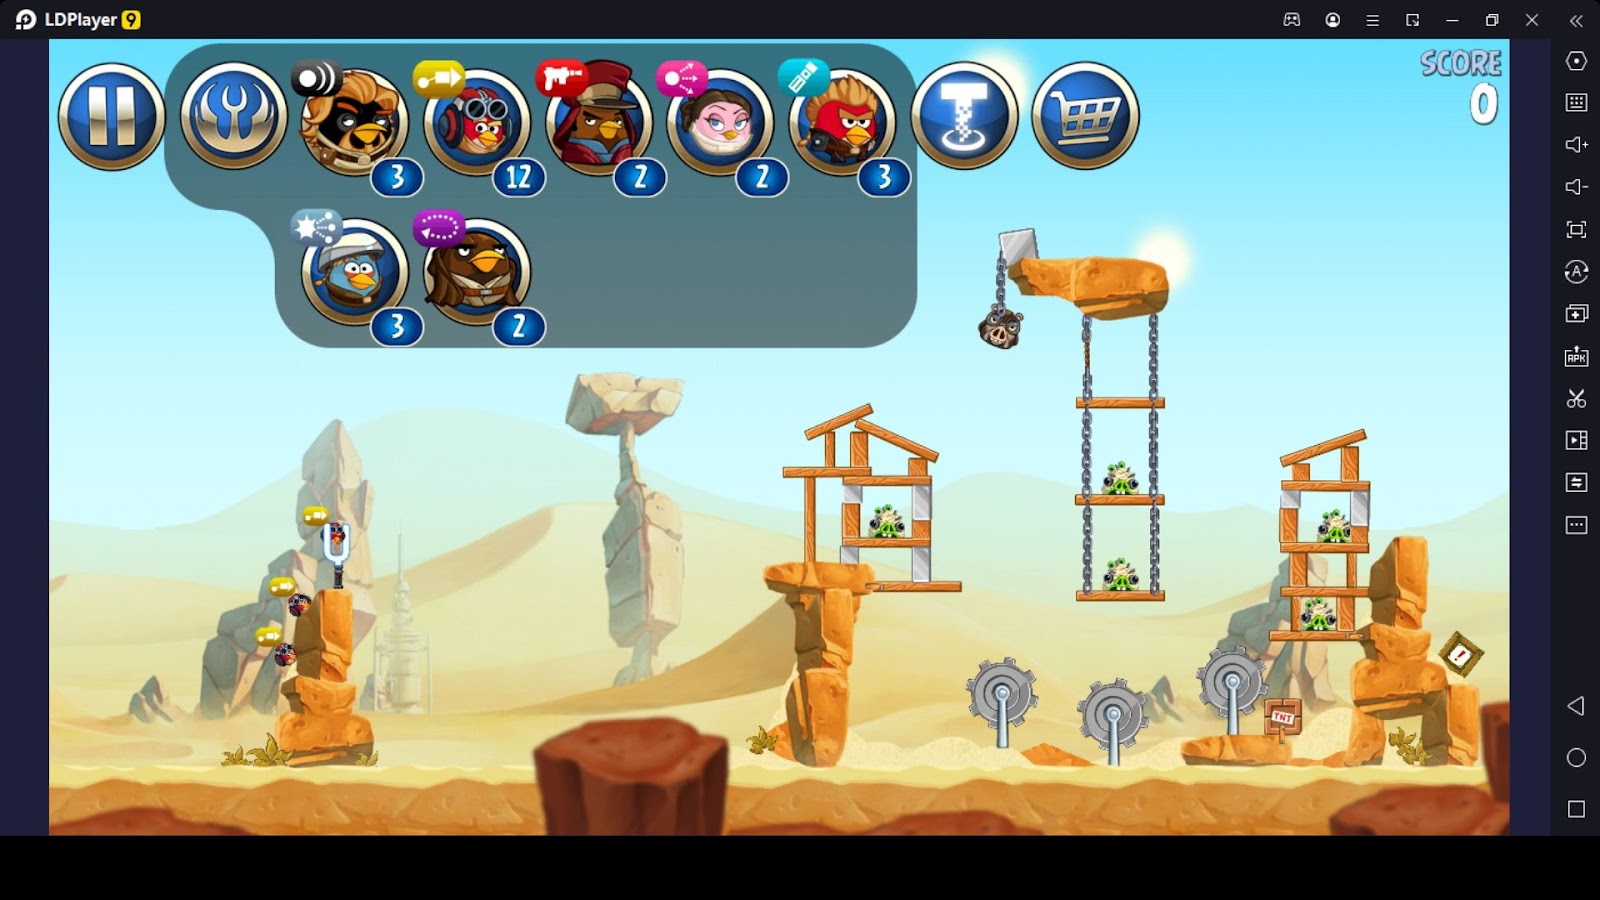 Angry Birds Star Wars tips you should use in your gameplay